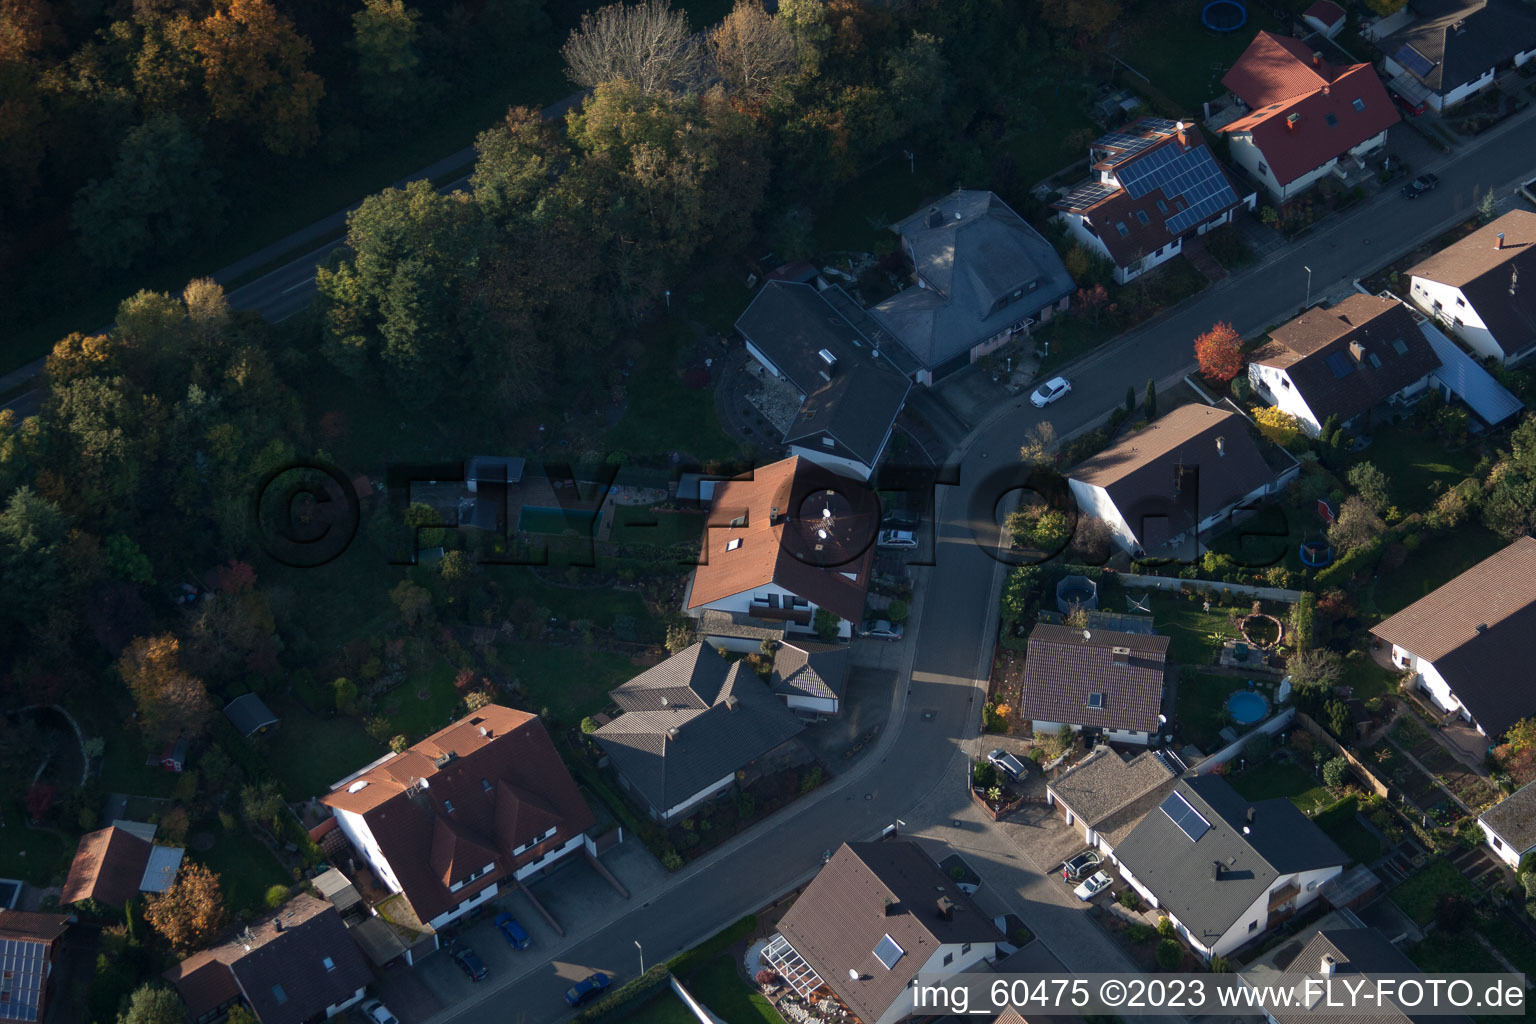 Drone image of S in Rülzheim in the state Rhineland-Palatinate, Germany